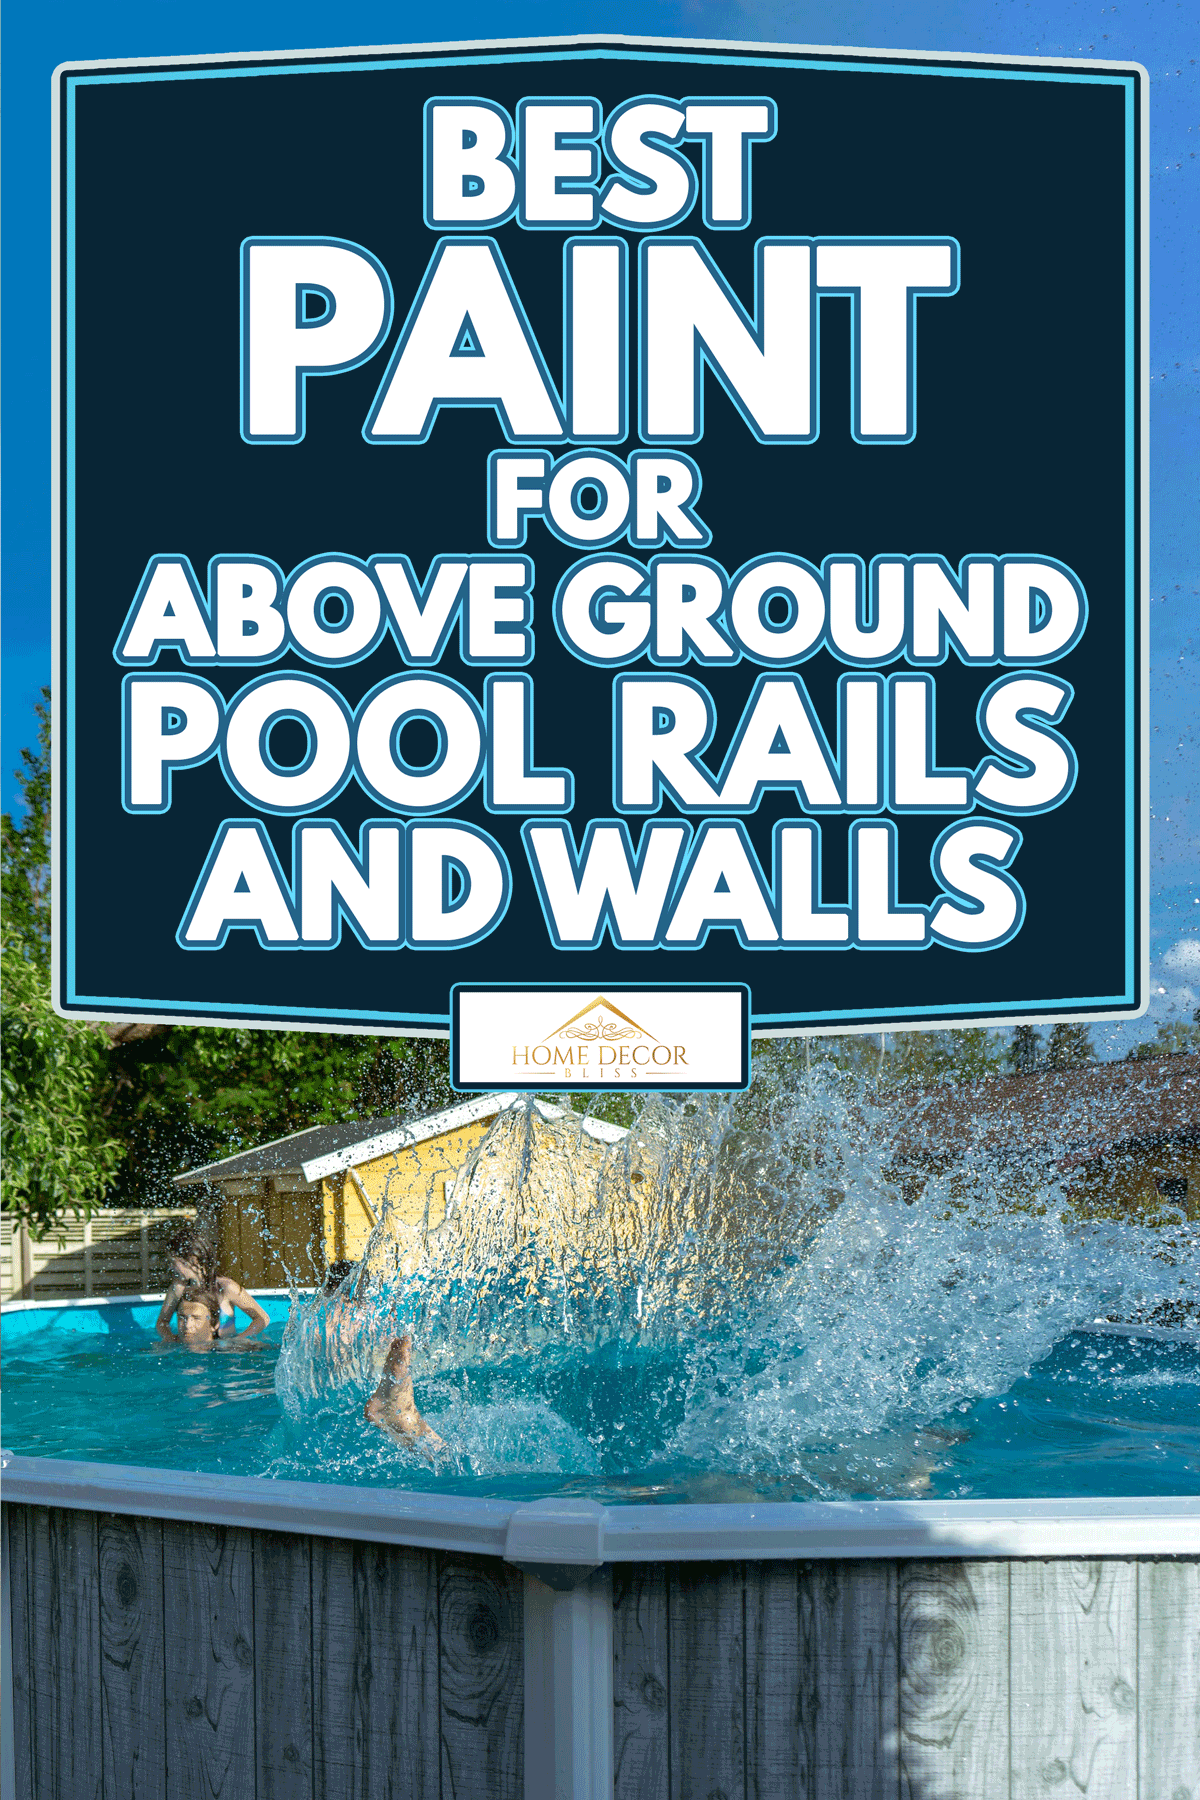 A children jump into the pool with a splash, Best Paint For Above Ground Pool Rails And Walls